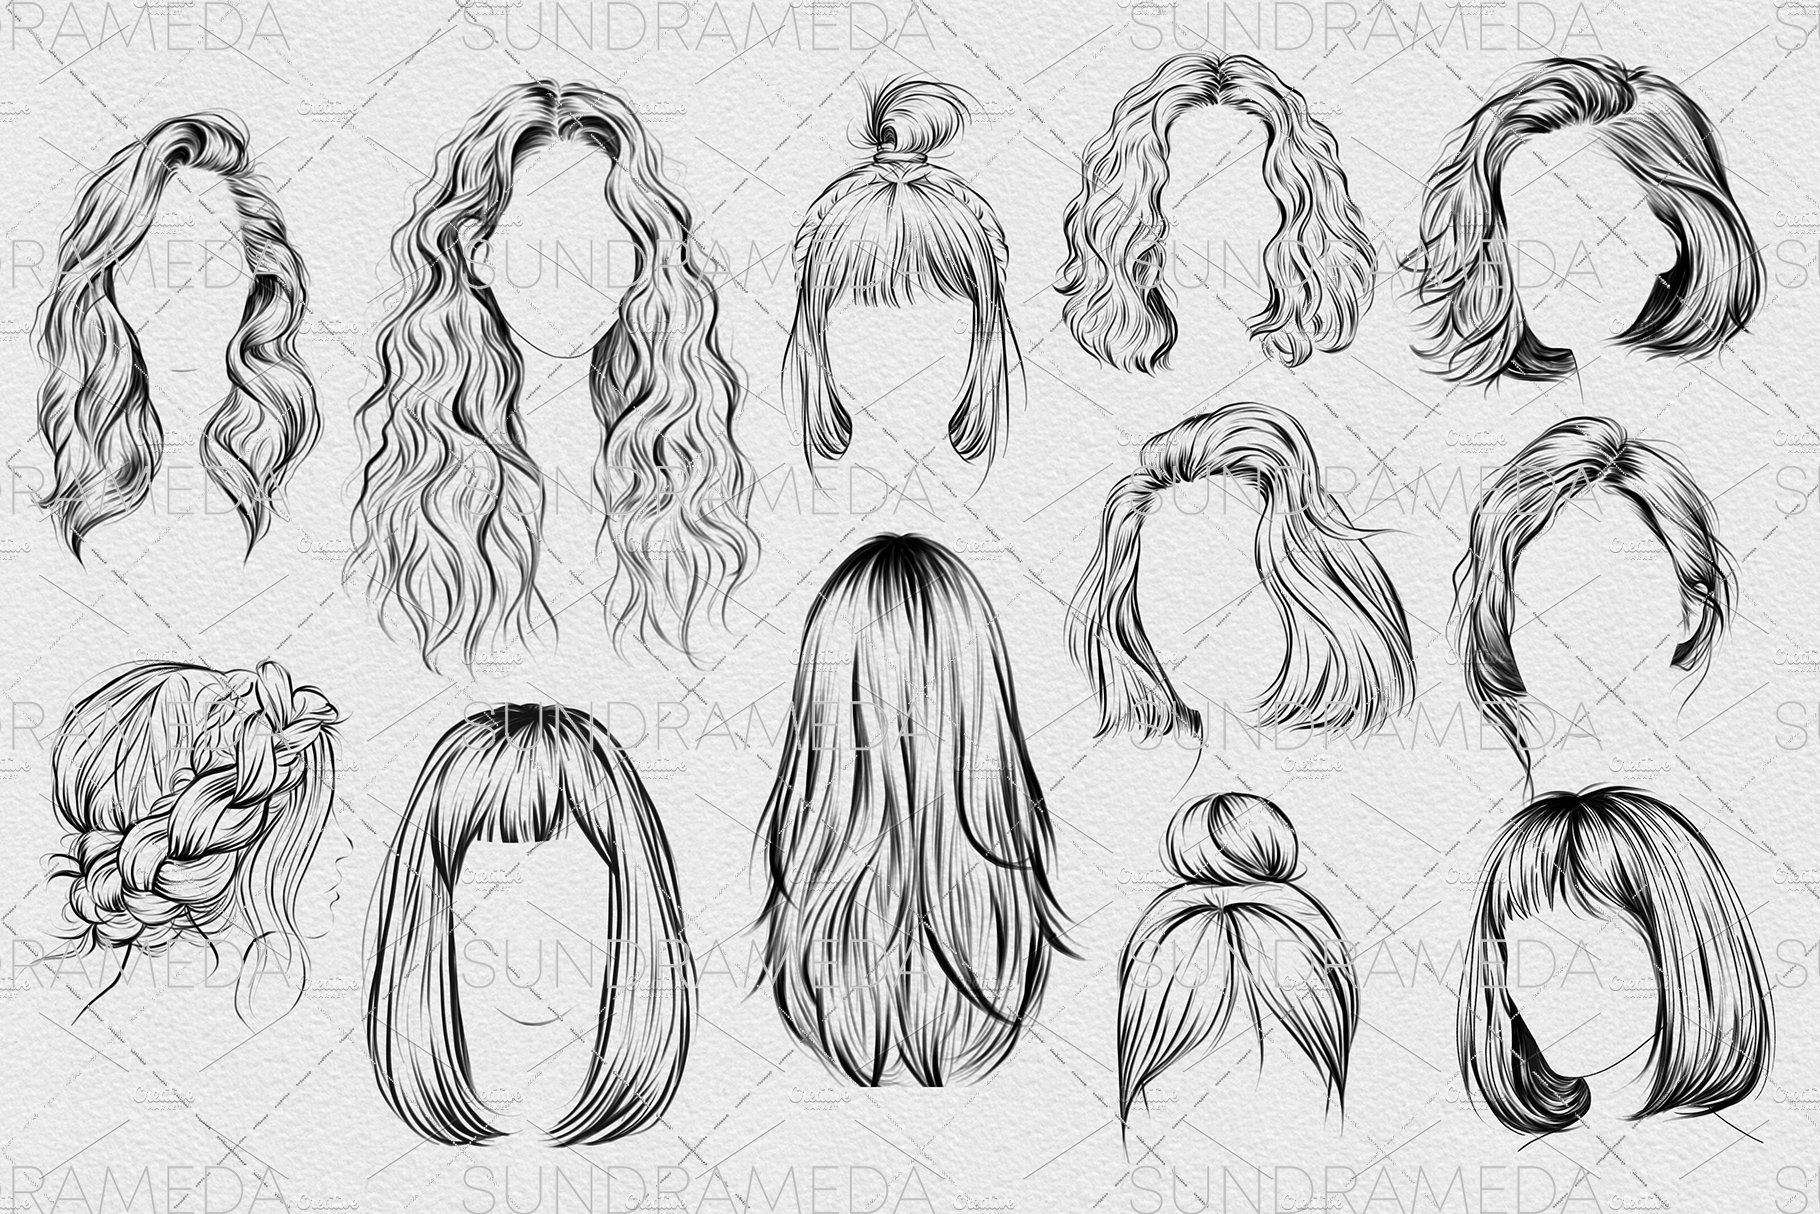 24 Hairstyle Stamp Brushes Photoshoppreview image.